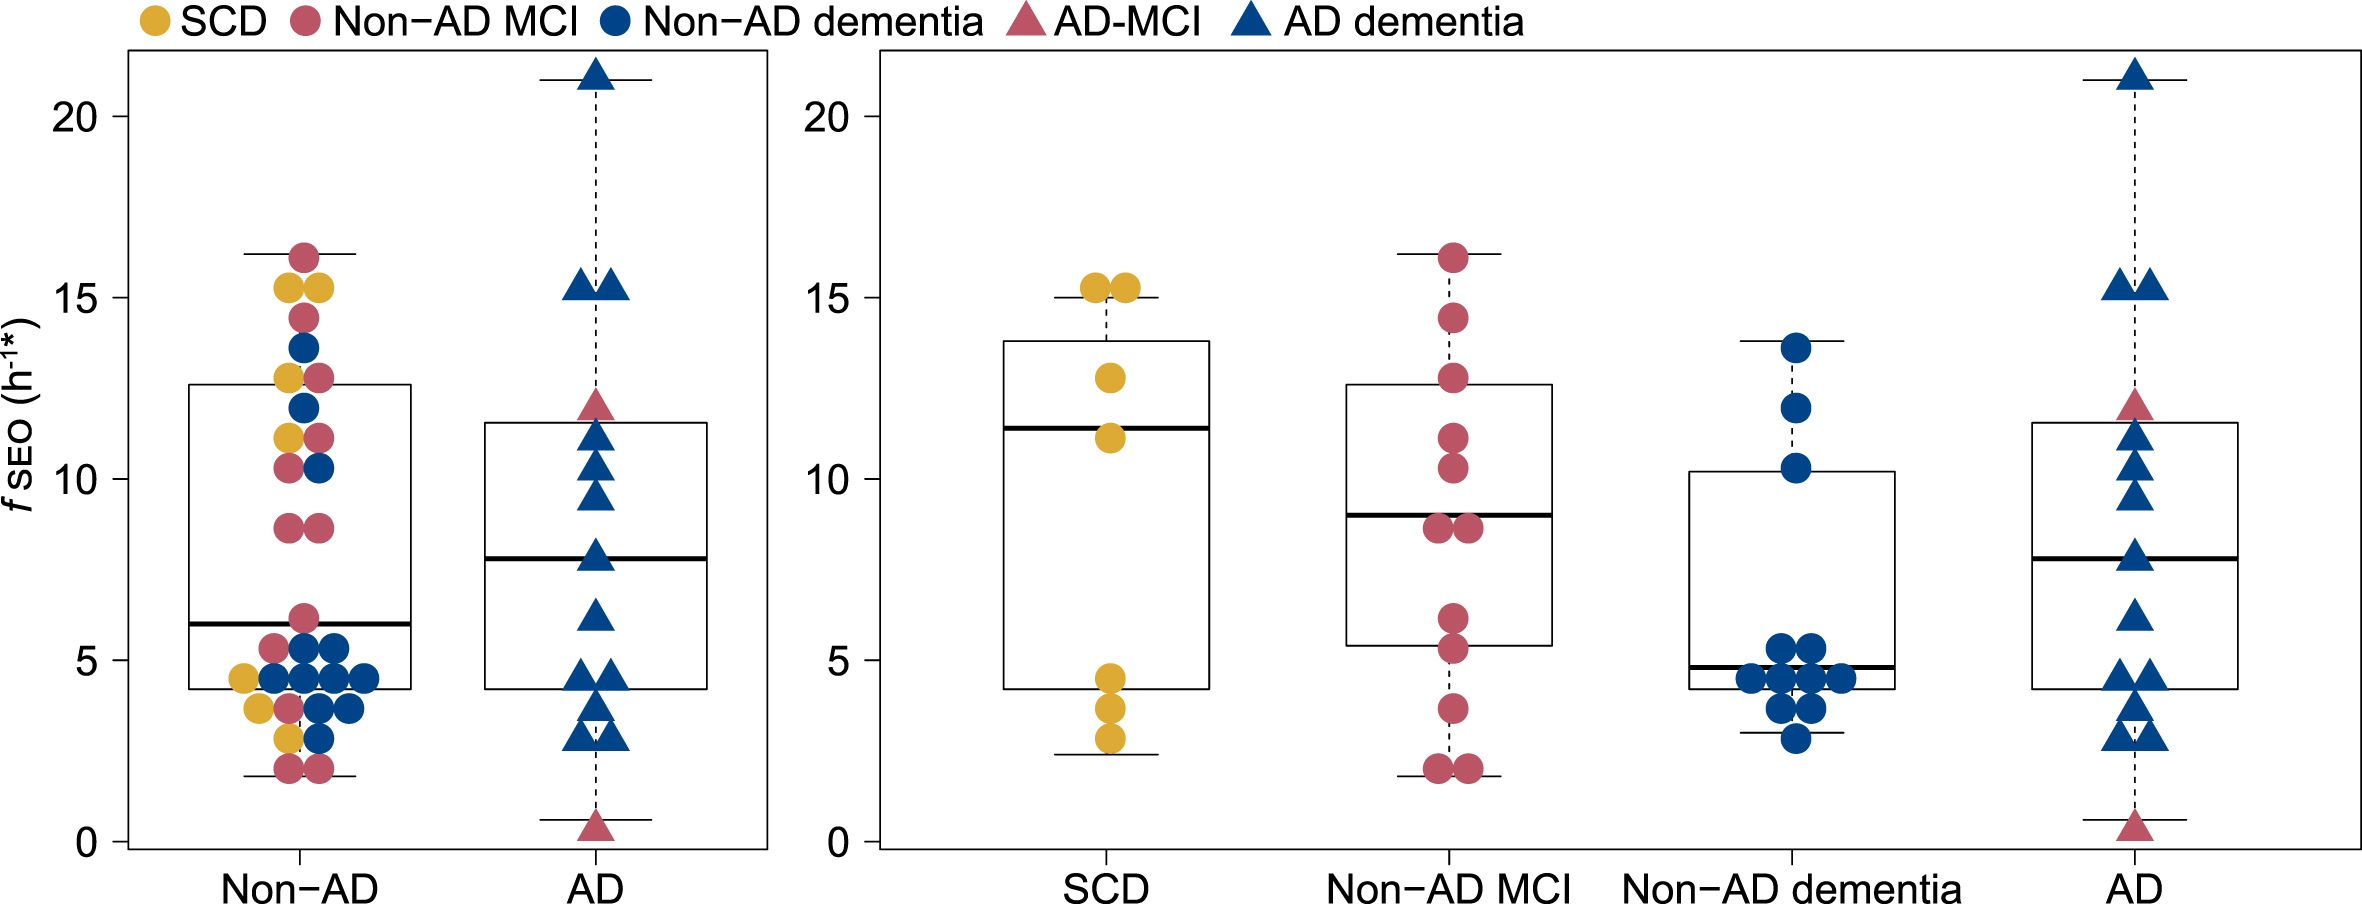 Distribution of serum nanoplaque levels (fSEO) in non-AD and AD patients and across SCD, Non-AD MCI, Non-AD dementia and AD (MCI and dementia) patients. *Two outliers with fSEO = 70.2 h-1 (non-AD MCI) and fSEO = 31.2 h-1 (non-AD dementia) are not shown. AD, Alzheimer’s disease; fSEO, frequency of single event occurrence; MCI, mild cognitive impairment; SCD, subjective cognitive decline.